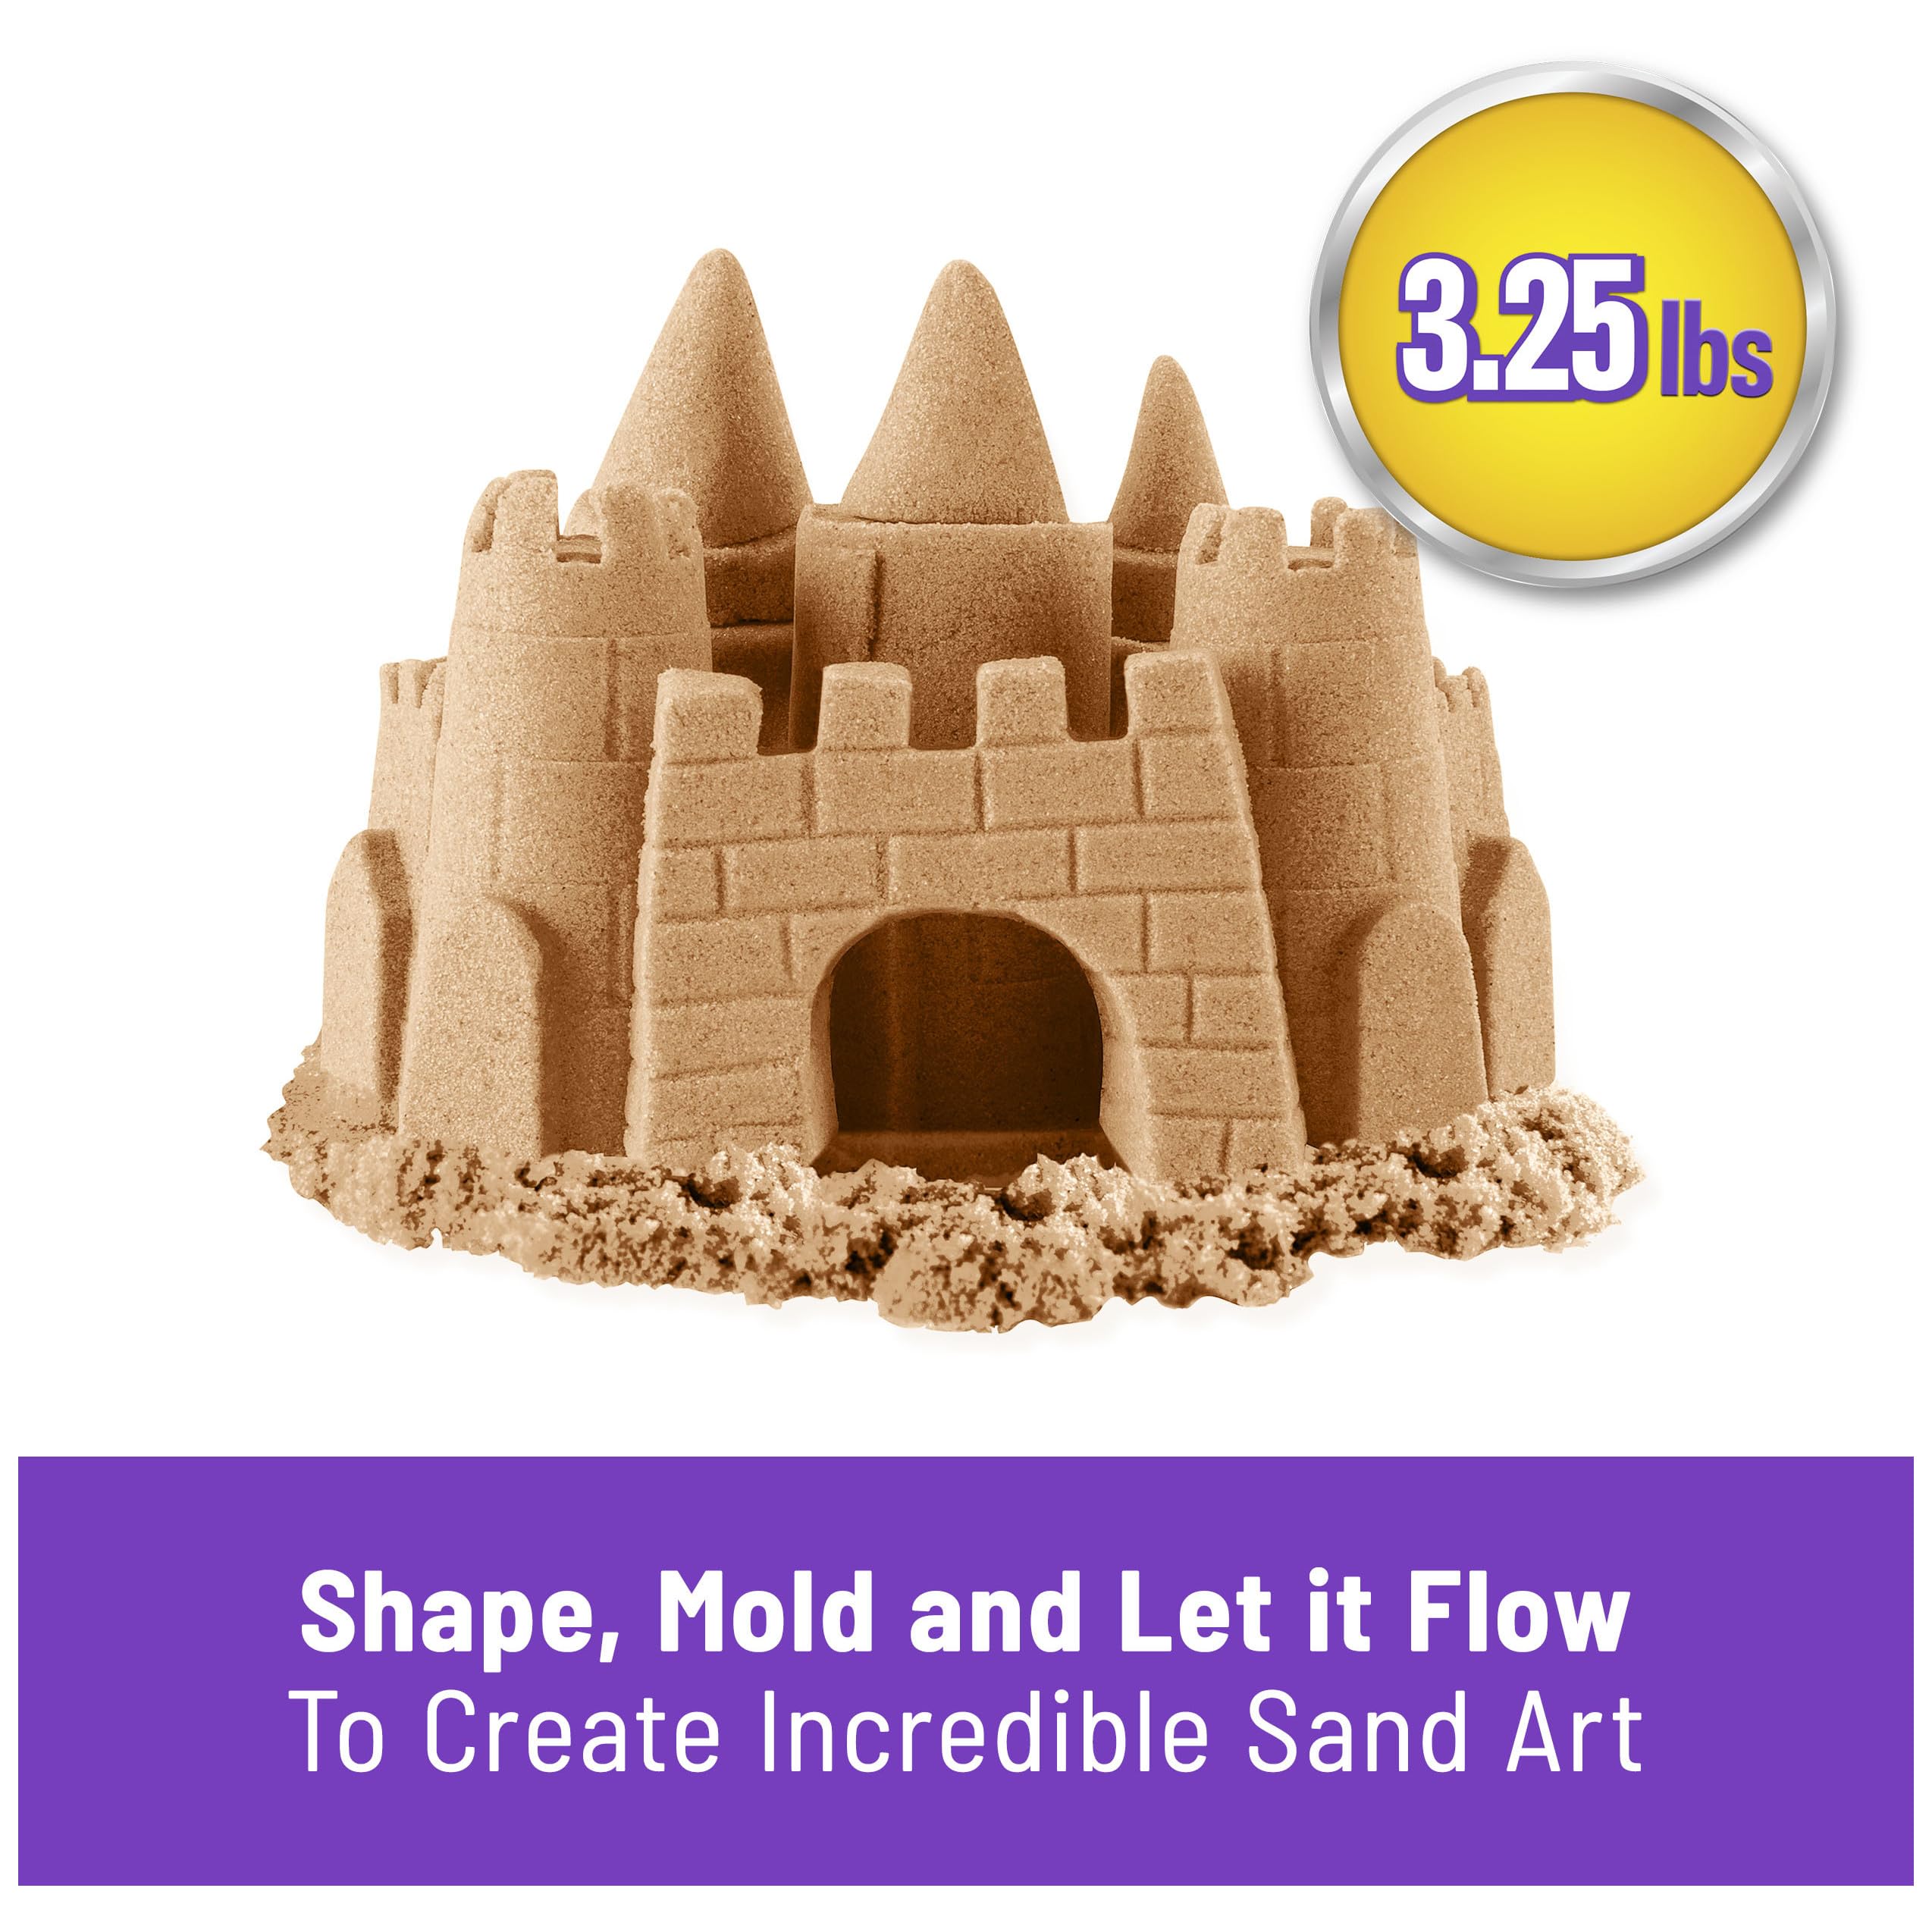 Kinetic Sand, The Original Moldable Play Sand, 3.25lbs Beach Sand, Sensory Toys for Kids Ages 3 and up (Amazon Exclusive)